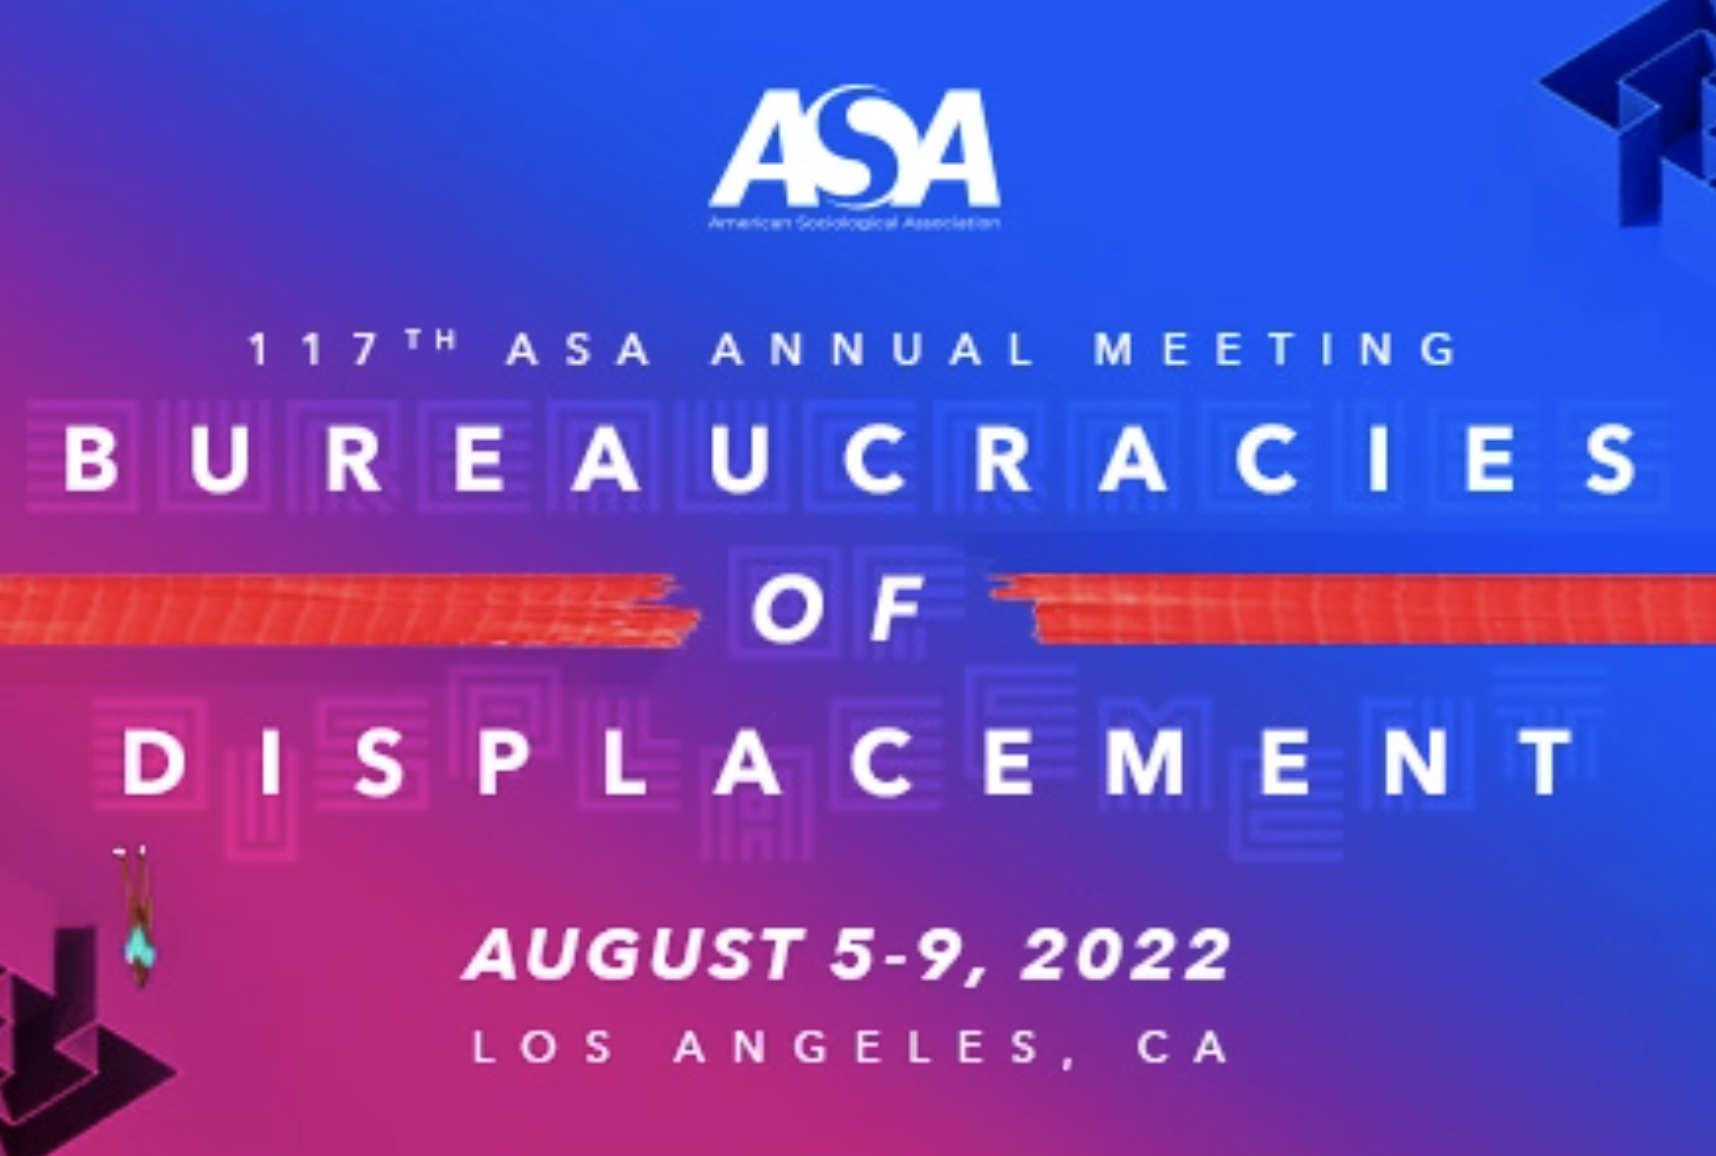 5-9 August, Gianluca MANZO at the ASA annual meeting in Los Angeles